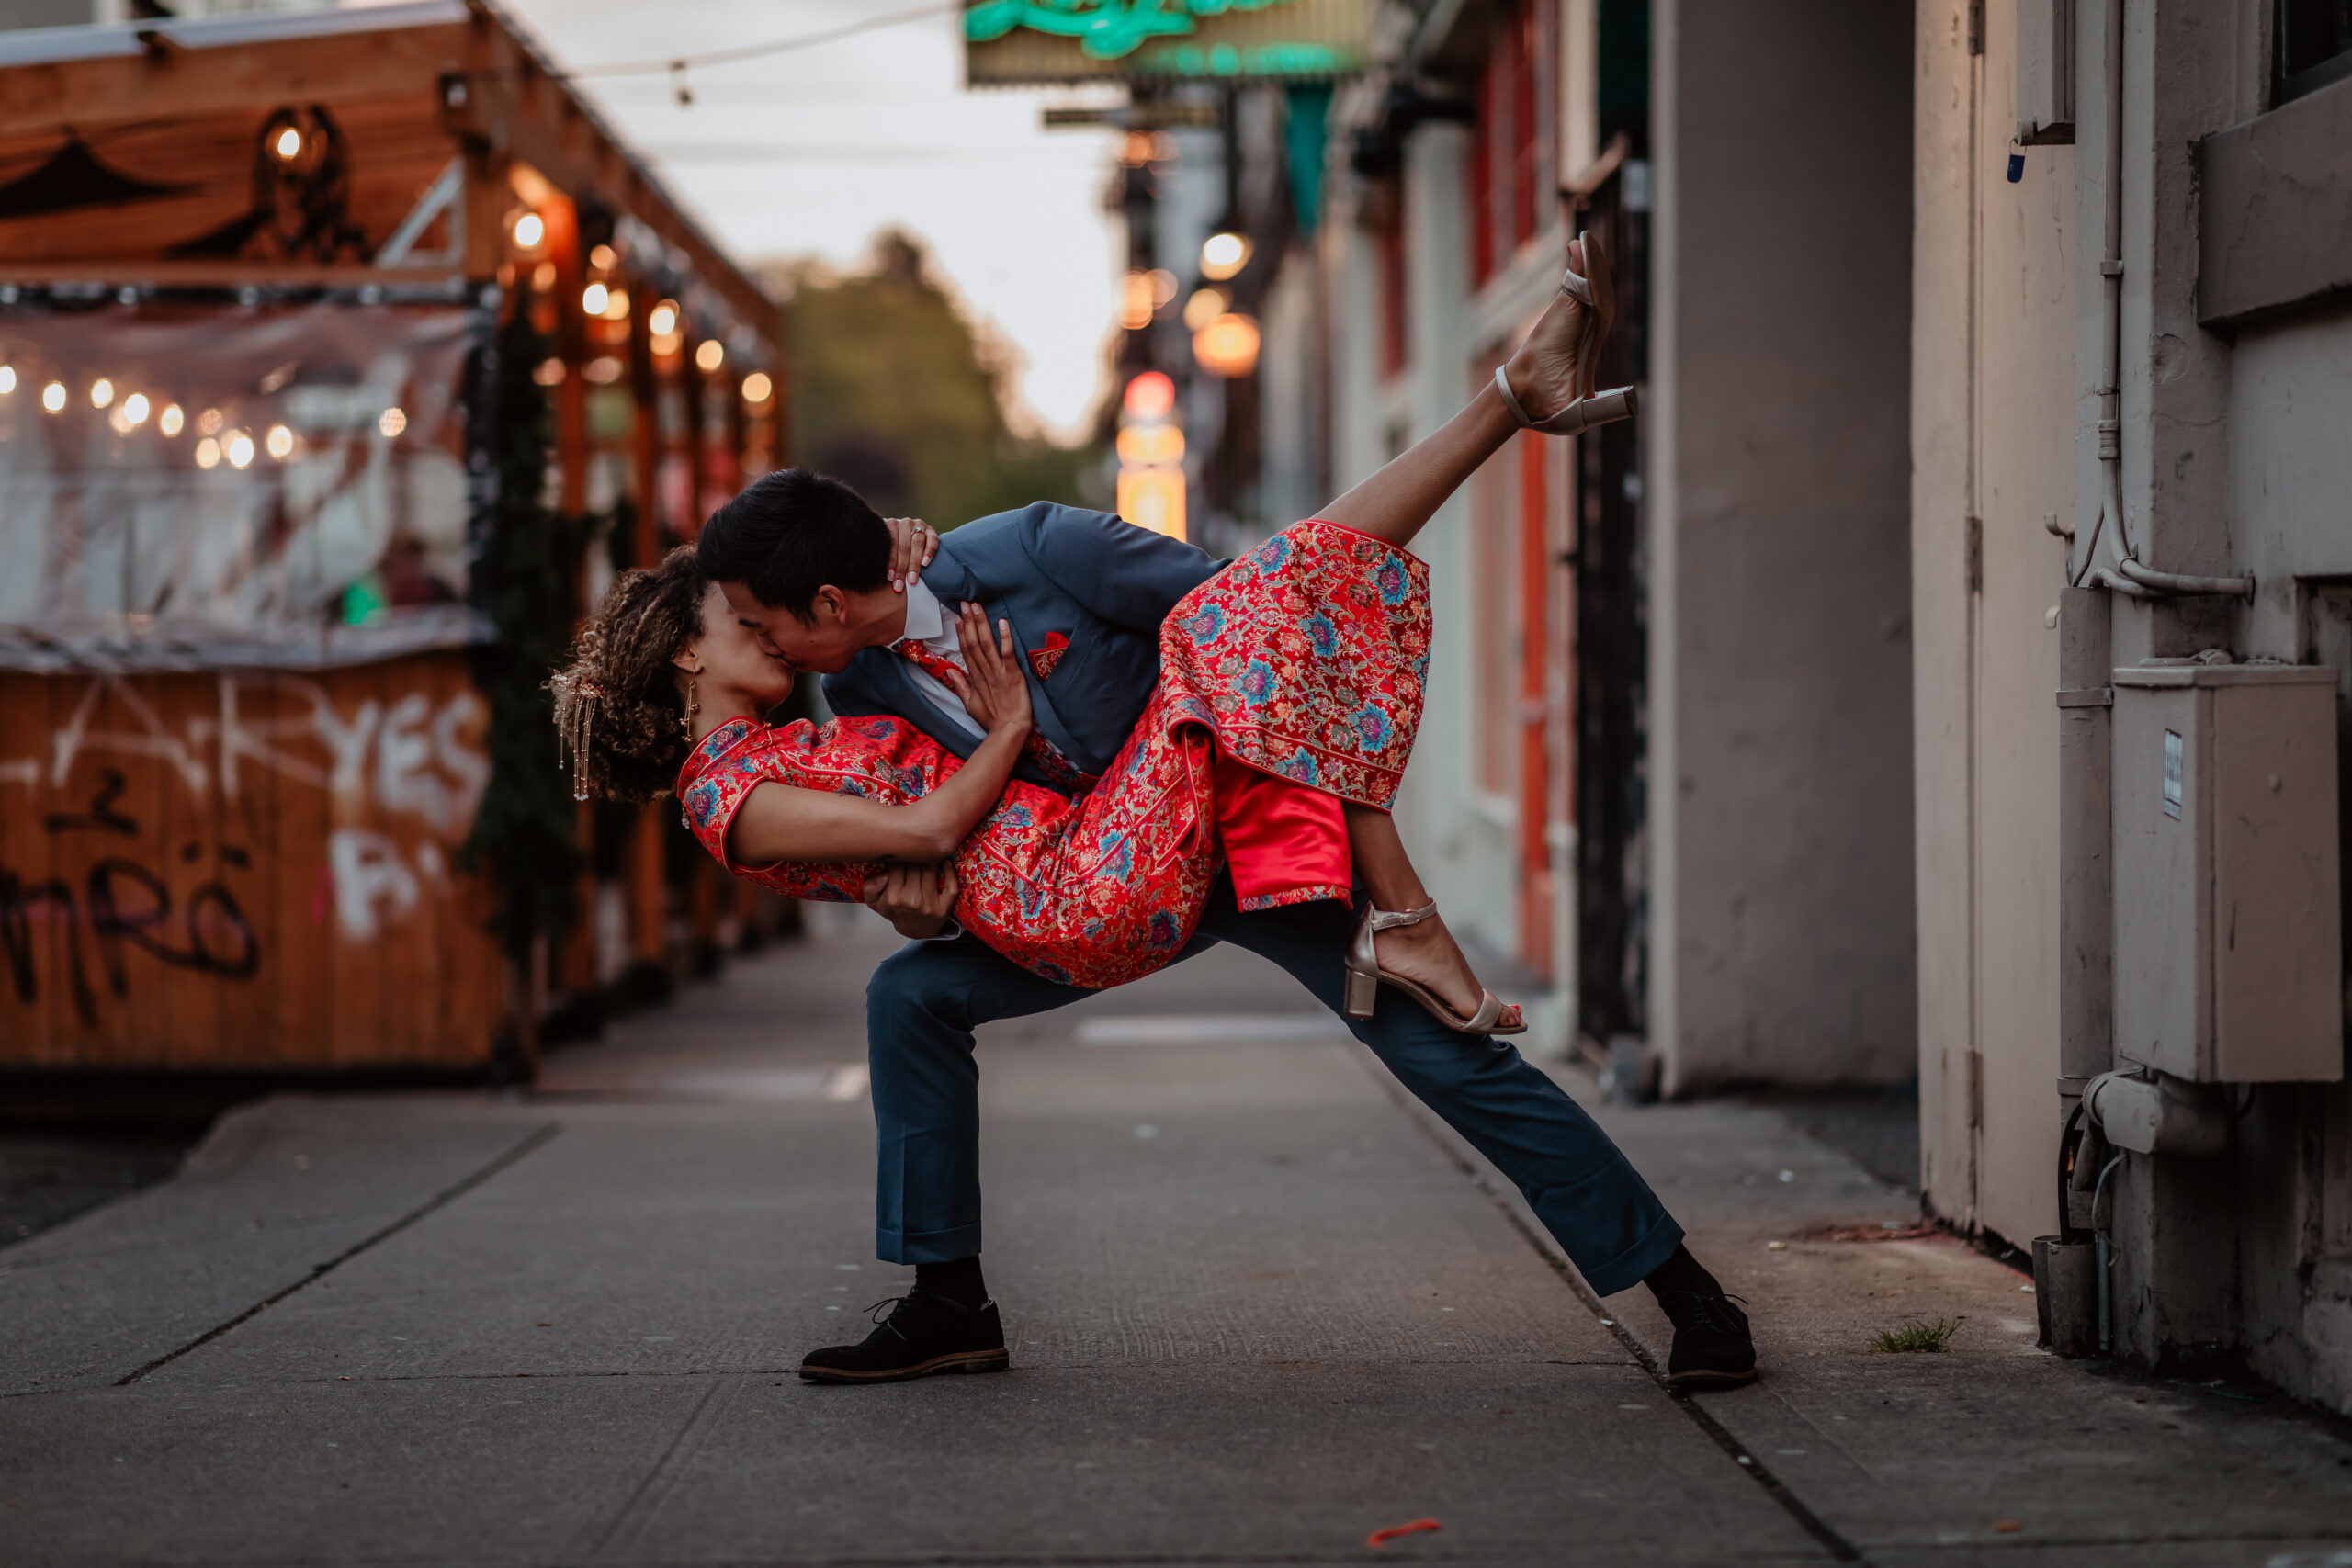 Man dipping woman in cheongsam while they kiss in Capitol Hill